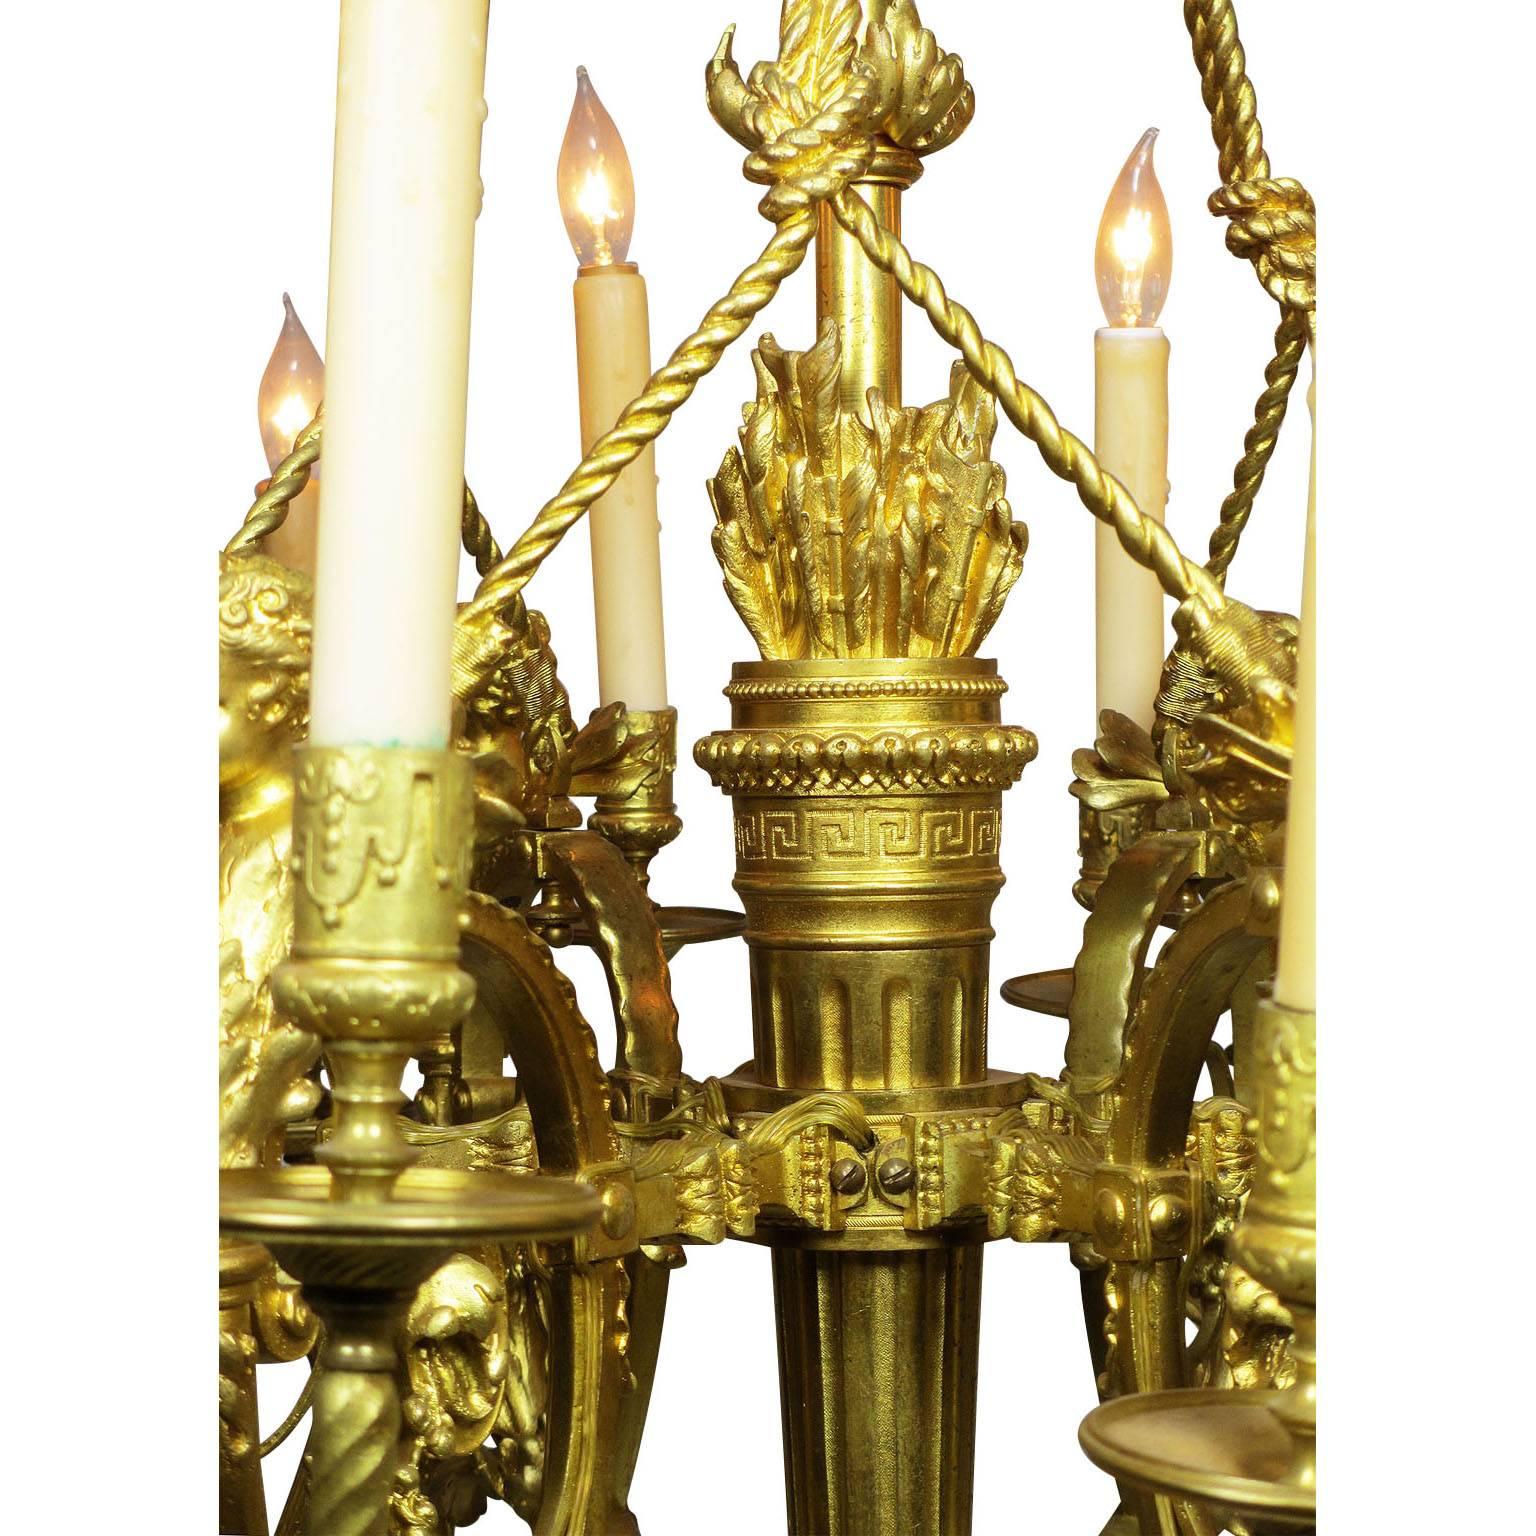 Early 20th Century A French Belle Époque 19th-20th Century 18-Light Gilt Bronze Cherub Chandelier For Sale